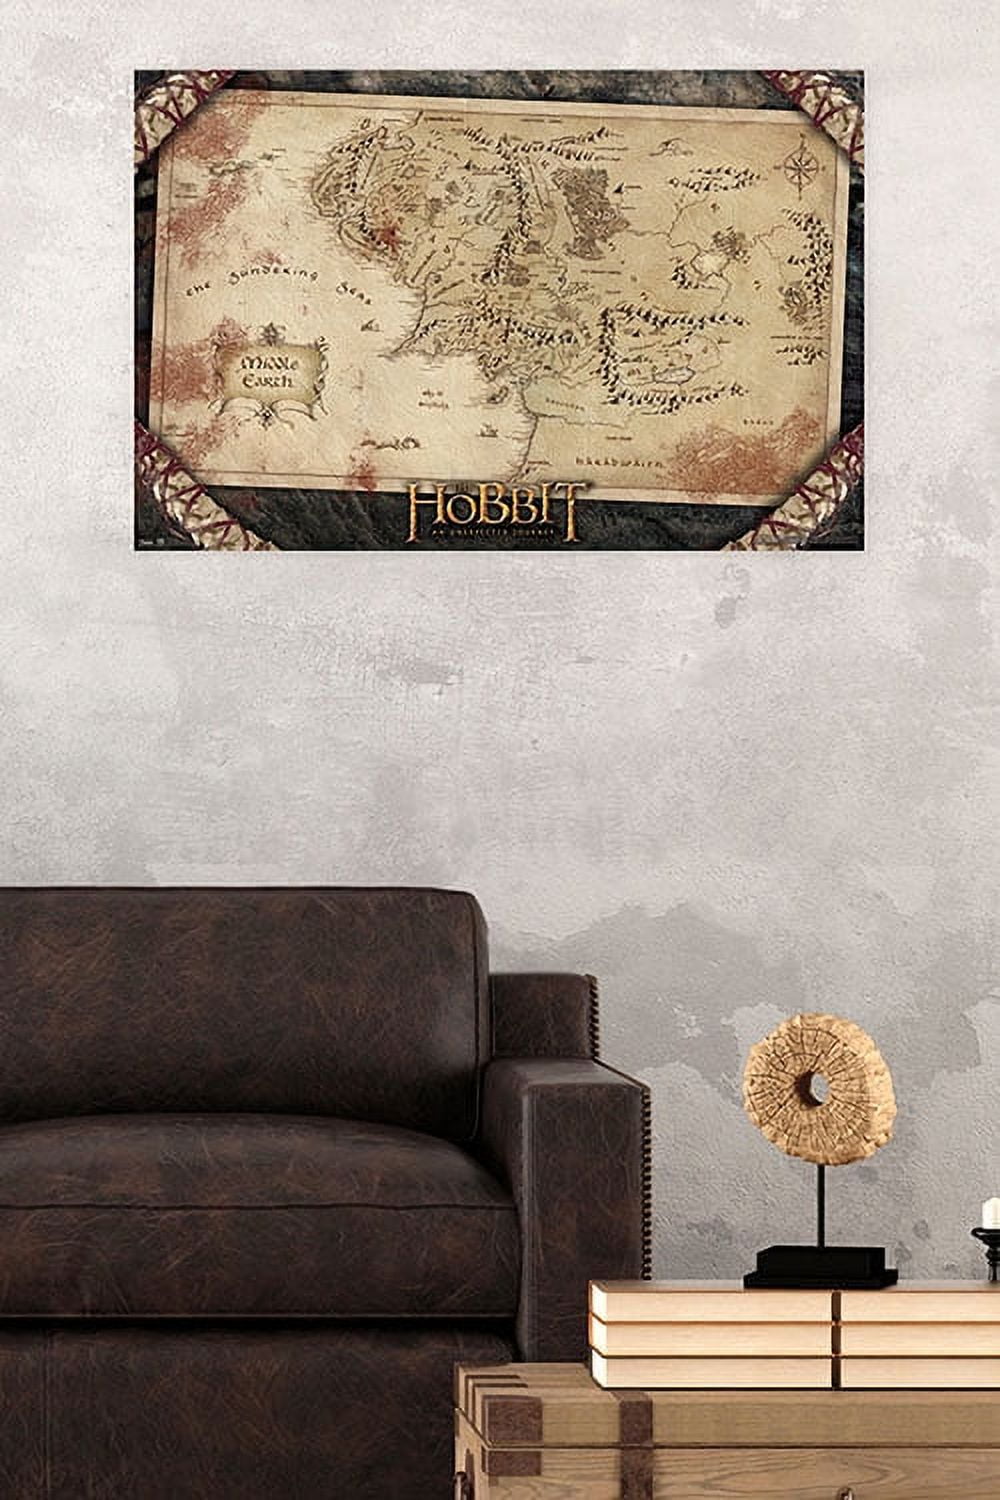 24X36 The Hobbit: An Unexpected Journey - Map Wall Poster, 24 x